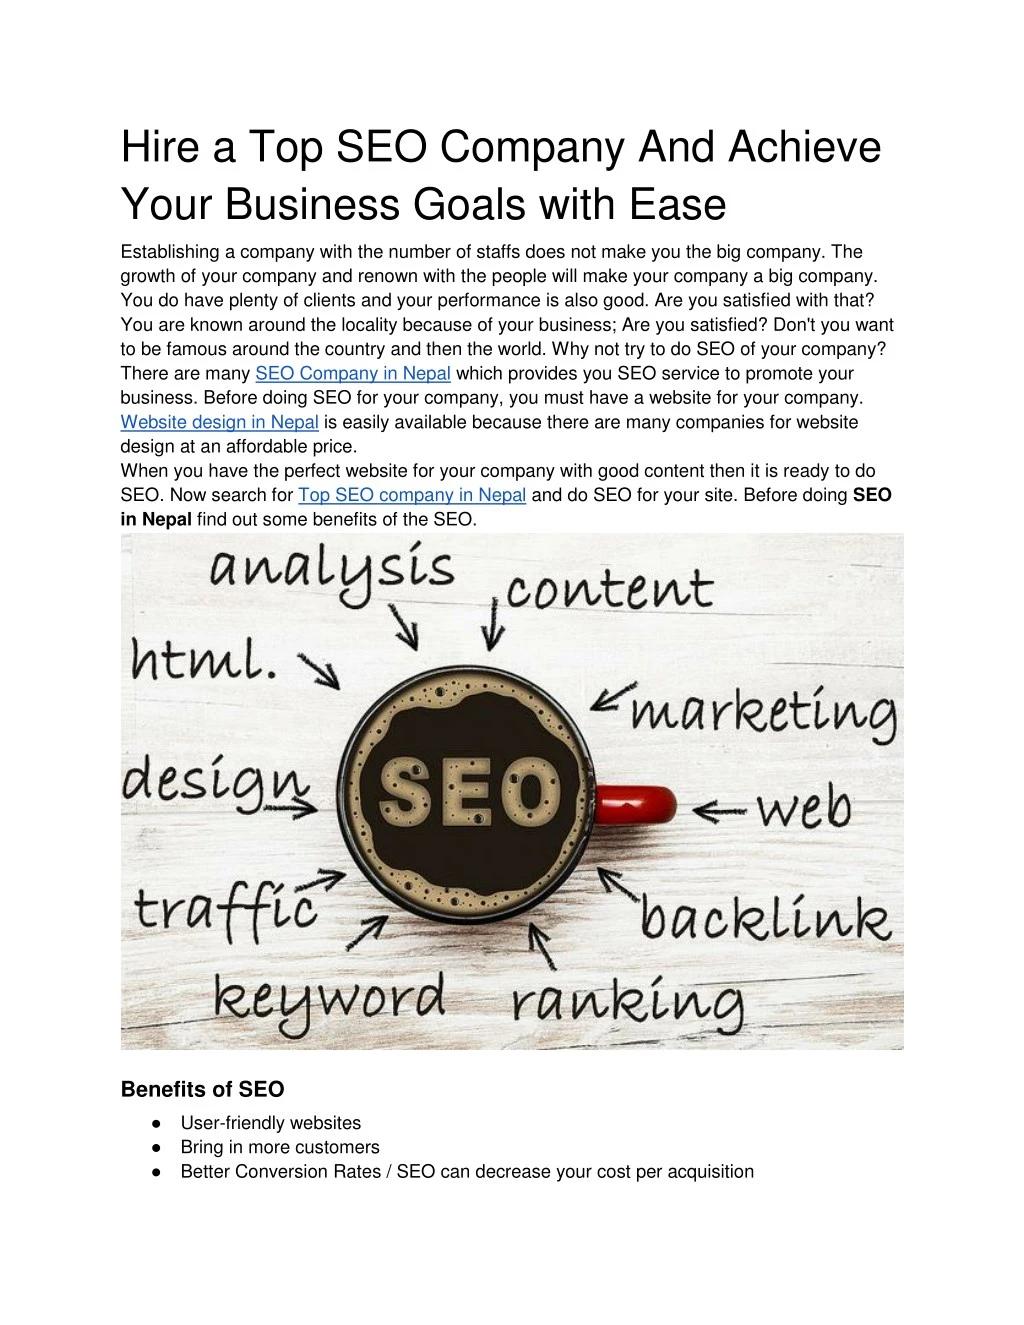 hire a top seo company and achieve your business